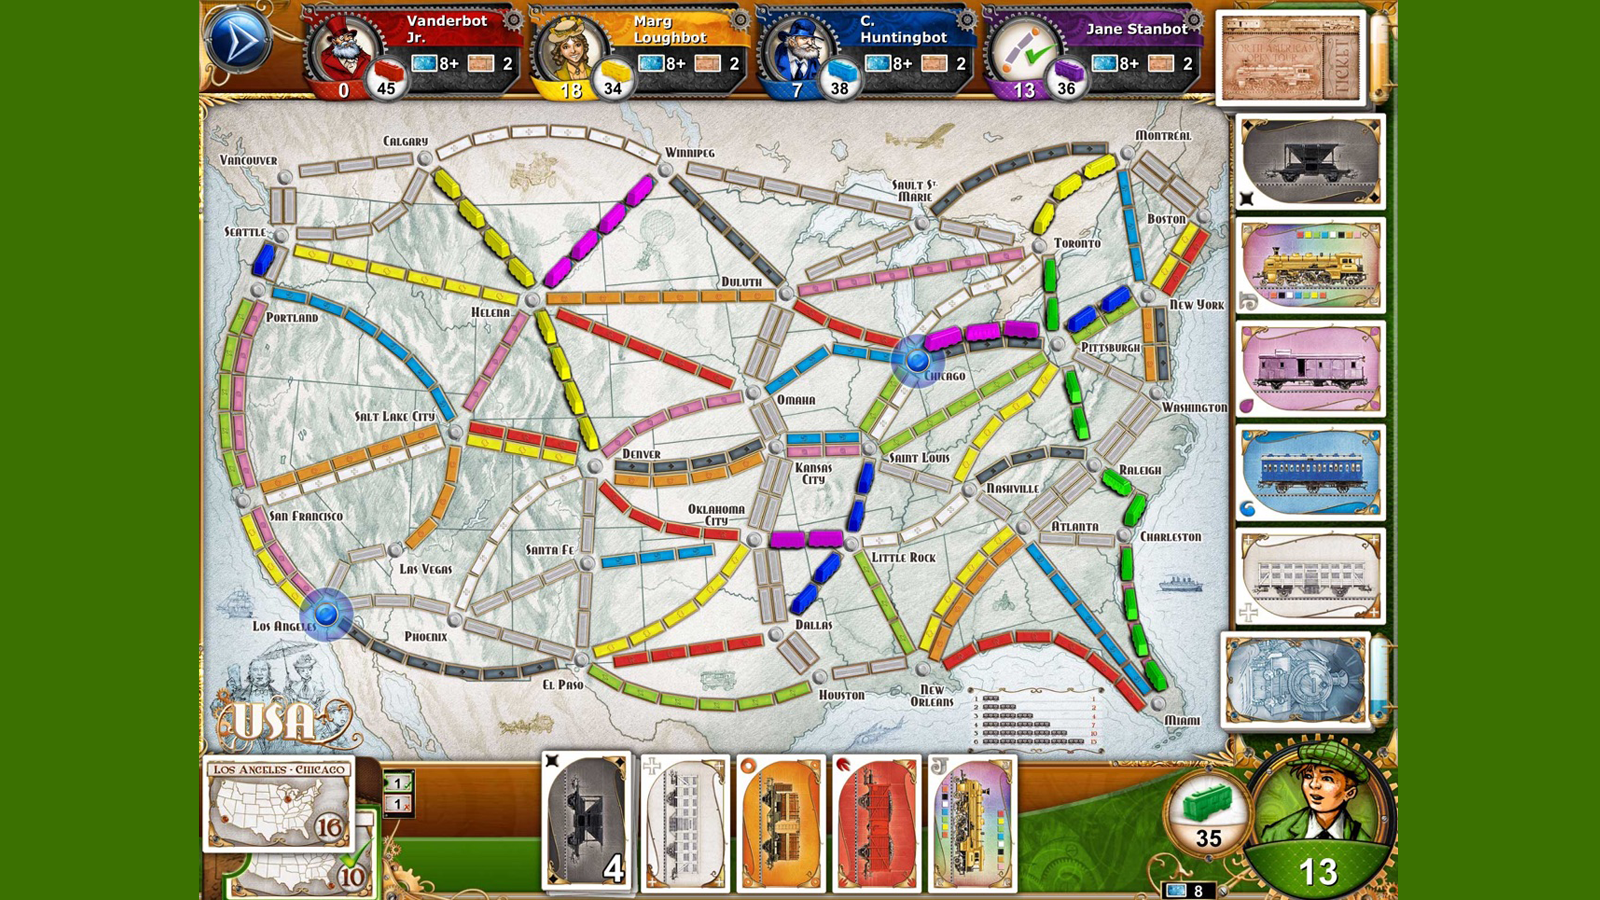 Ticket to Ride game with competing railways on the map